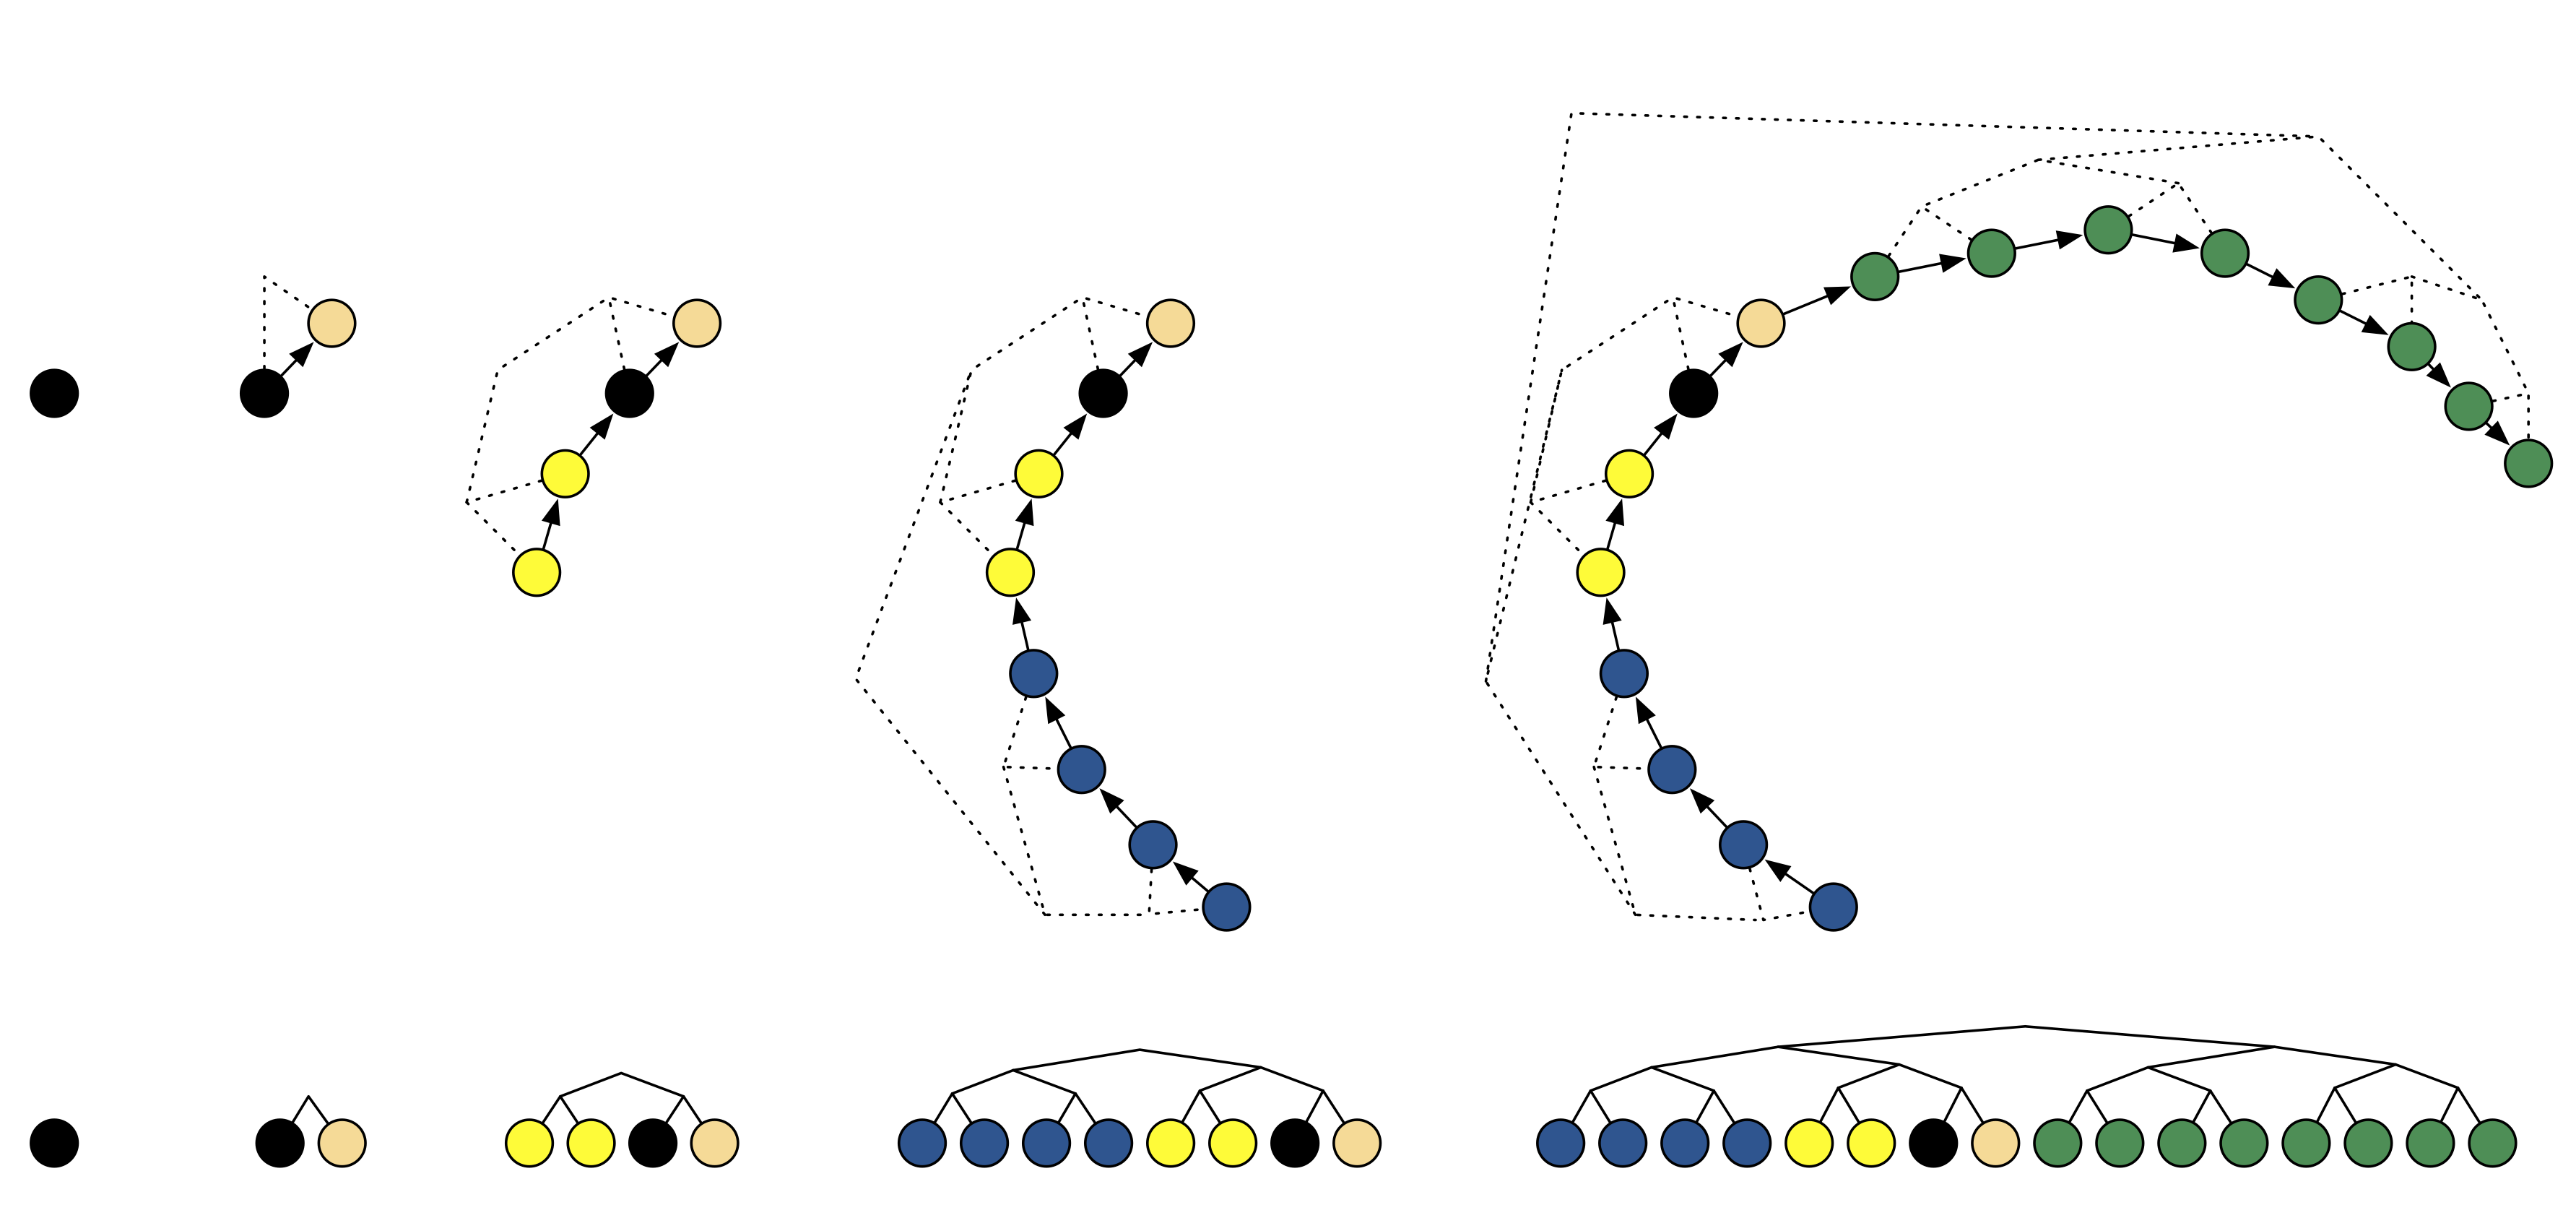 NUTS path extension. (Figure from Hoffman and Gelman, 2014.)